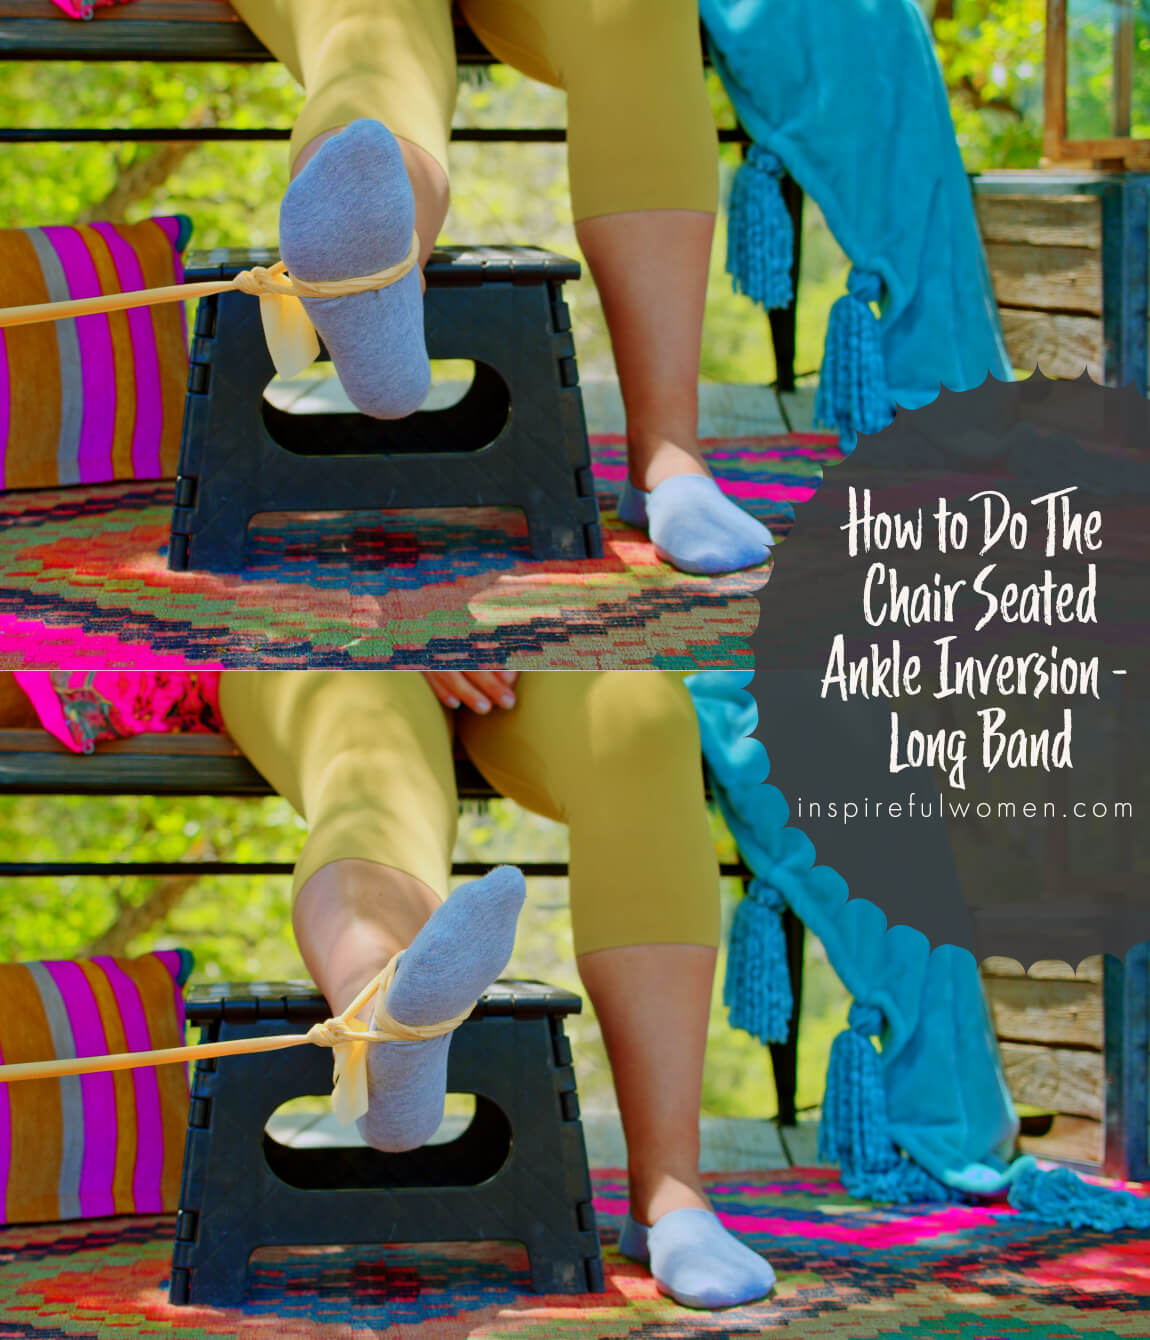 how-to-chair-seated-ankle-inversion-long-band-foot-rotation-exercise-proper-form